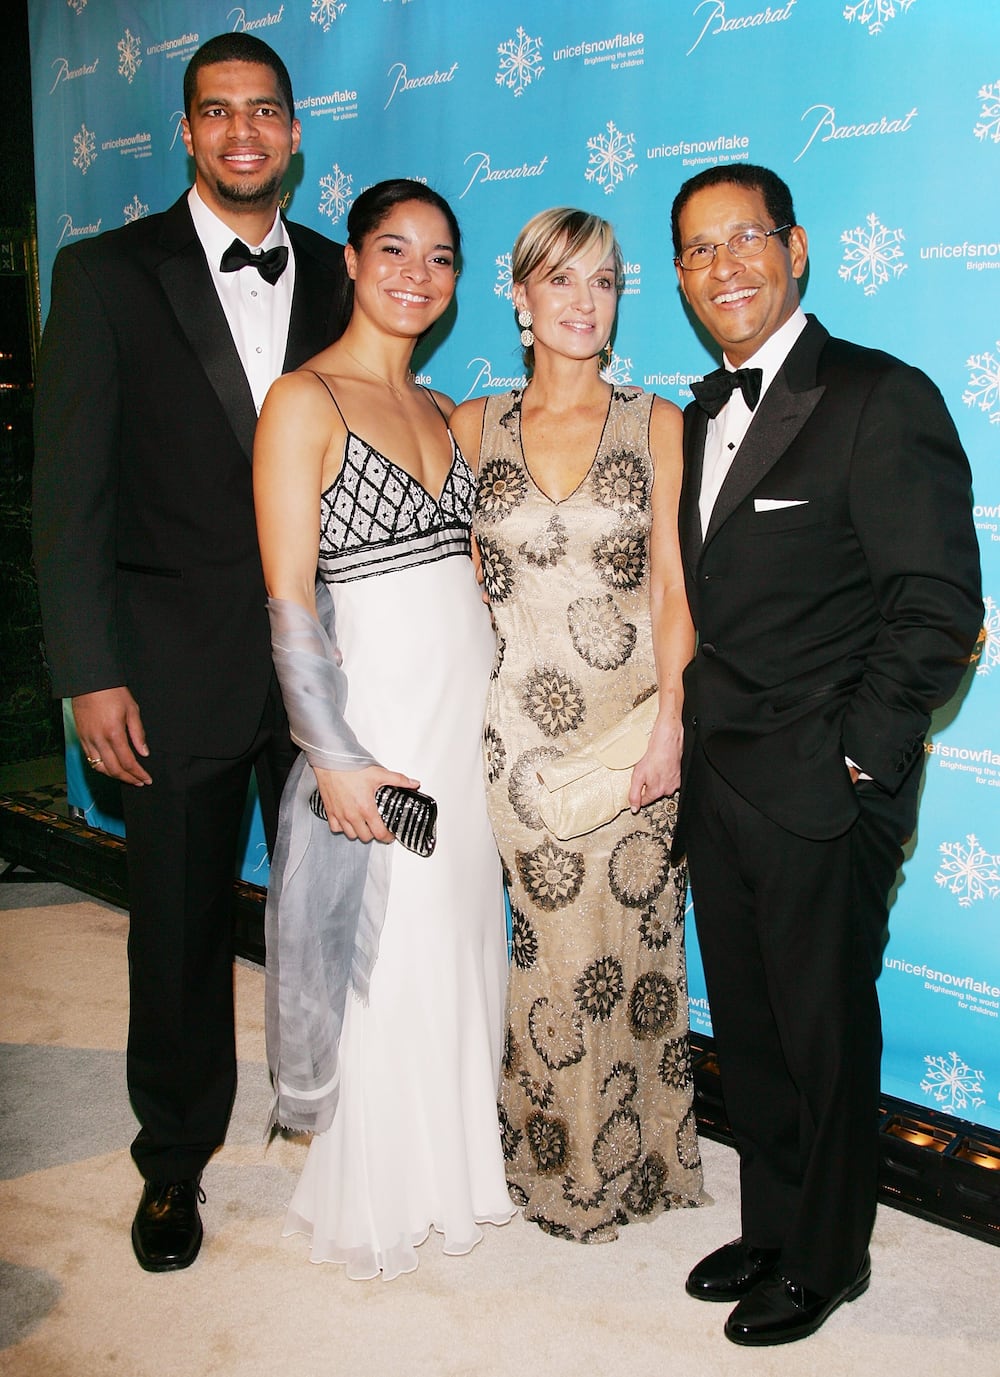 Does Bryant Gumbel have a daughter?